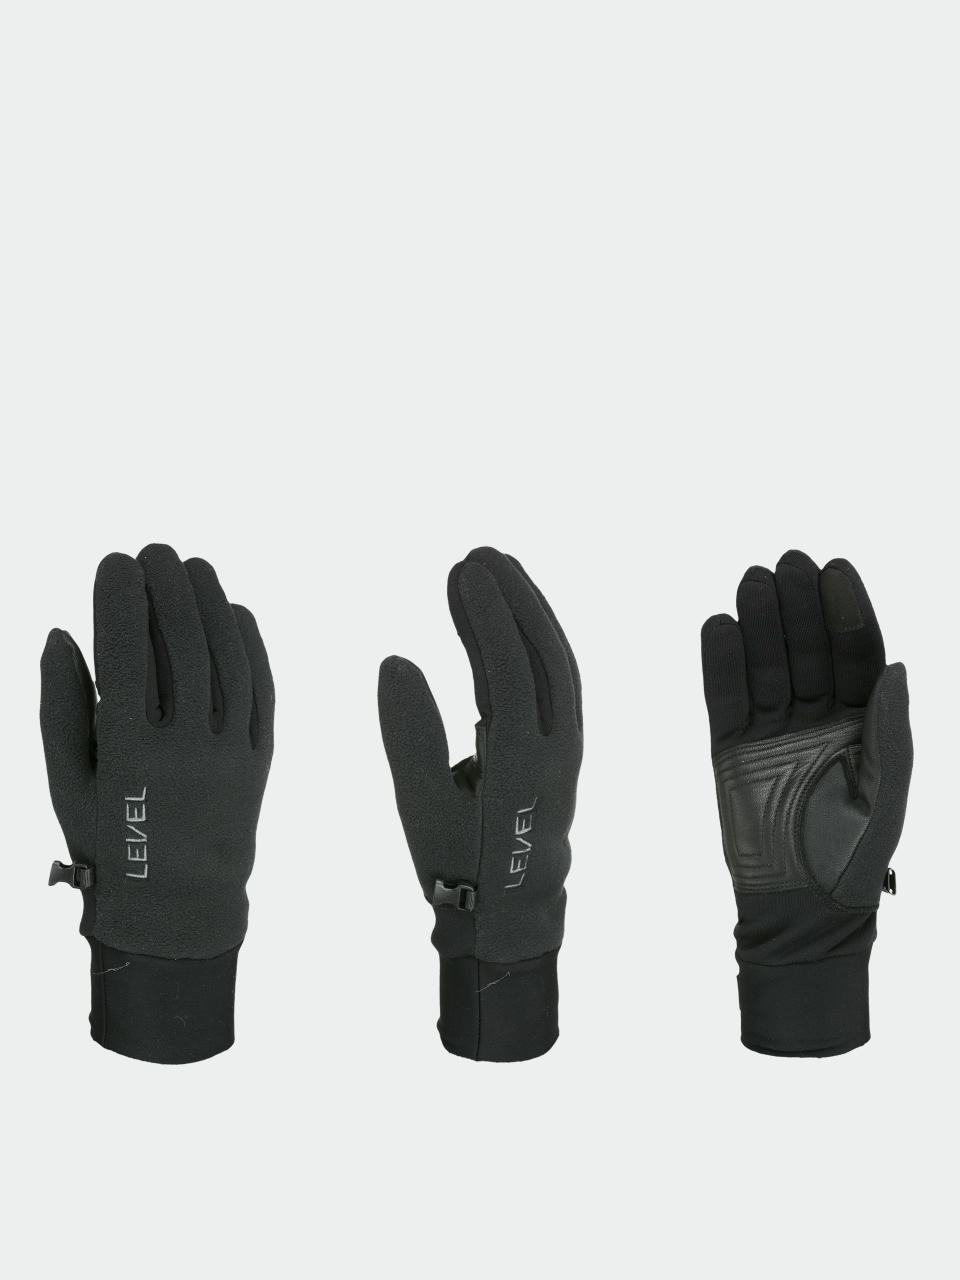 Level Touring Handschuhe (anthracite)